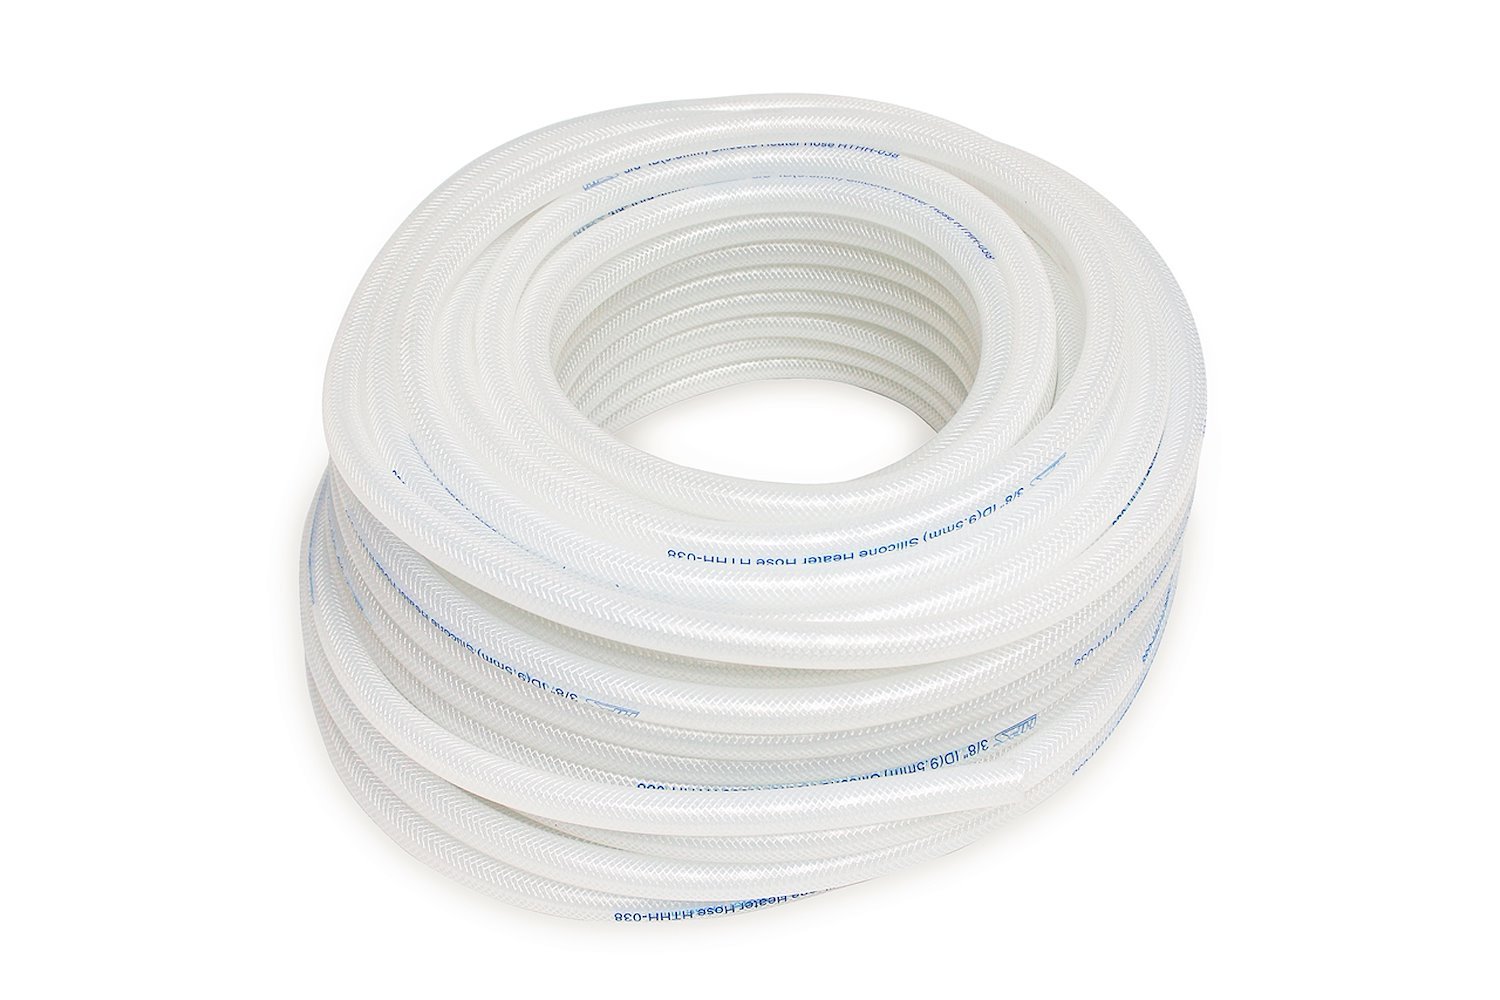 HTHH-062-CLEARx50 Silicone Heater Hose Tubing, High-Temp Reinforced, 5/8 in. ID, 50 ft. Roll, Clear